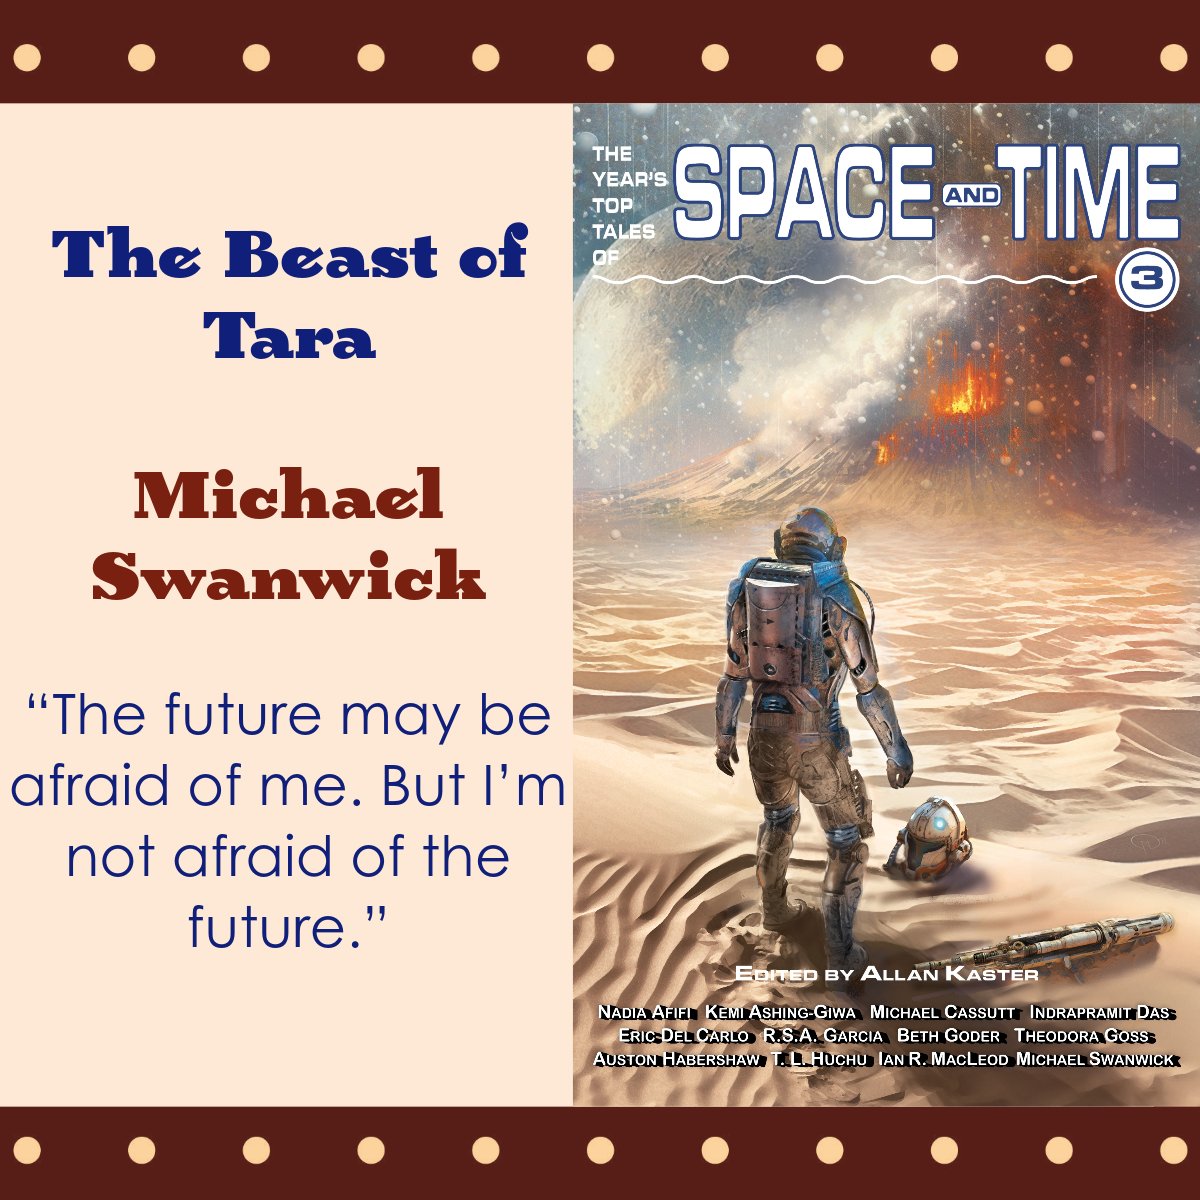 Time travel tall tale by @MichaelSwanwick
Paperback and ebook are out.
infinivoxsf.com/space-time-3